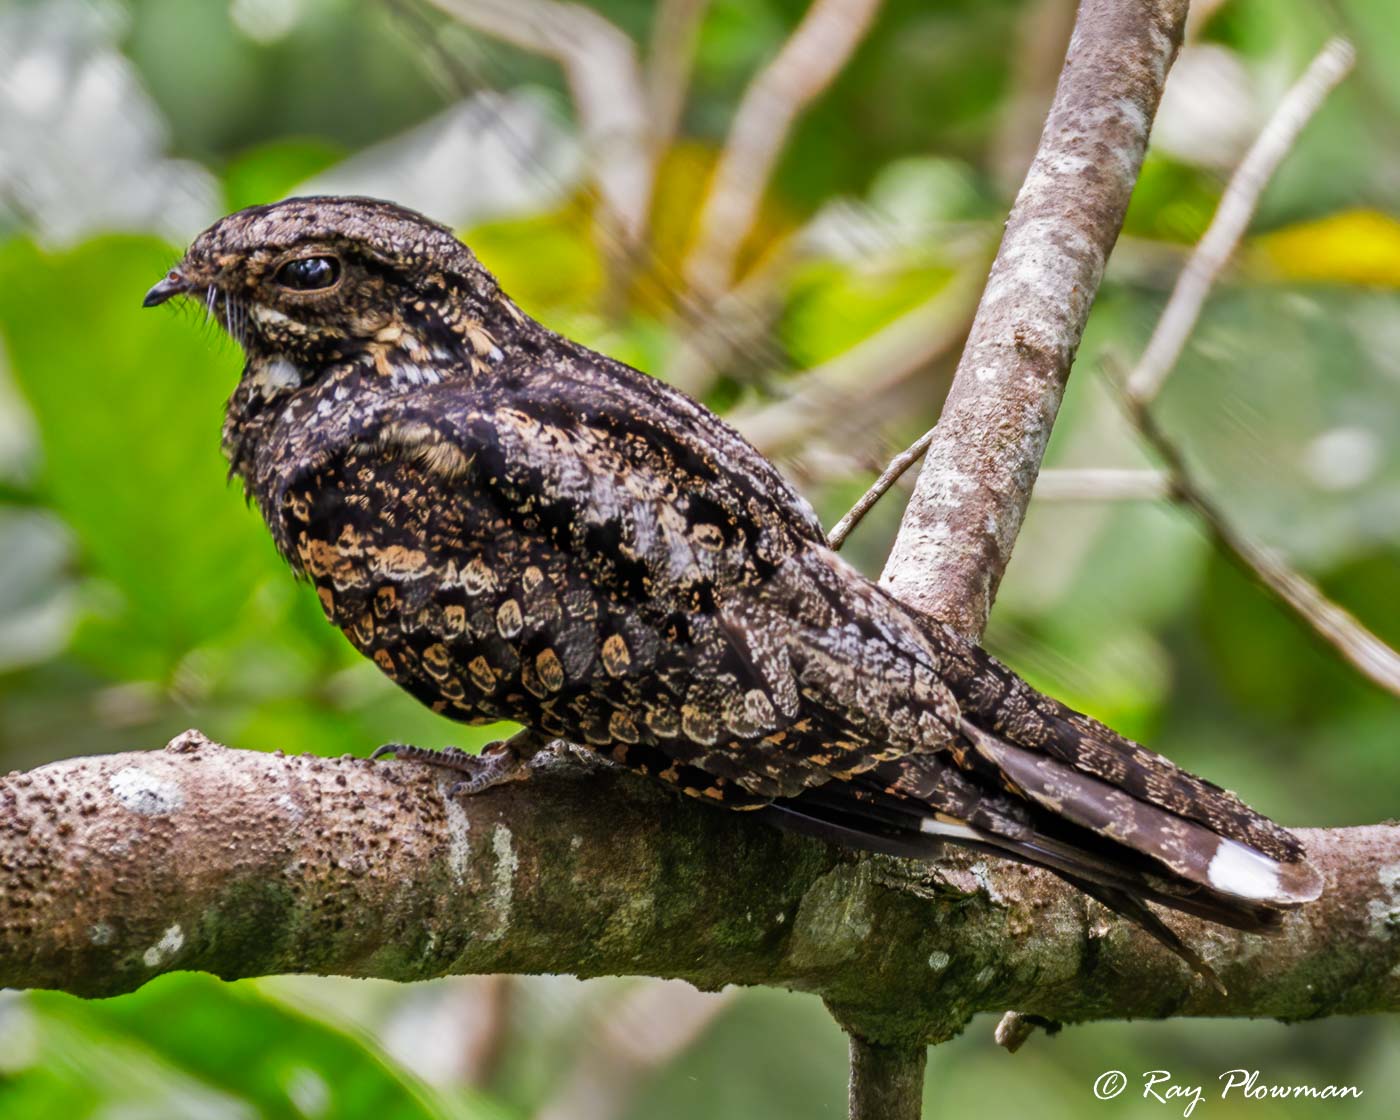 Grey Nightjar (Caprimulgus jotaka hazarae) male perched near Jelutong Tower in Singapore's Central Catchment Reserve